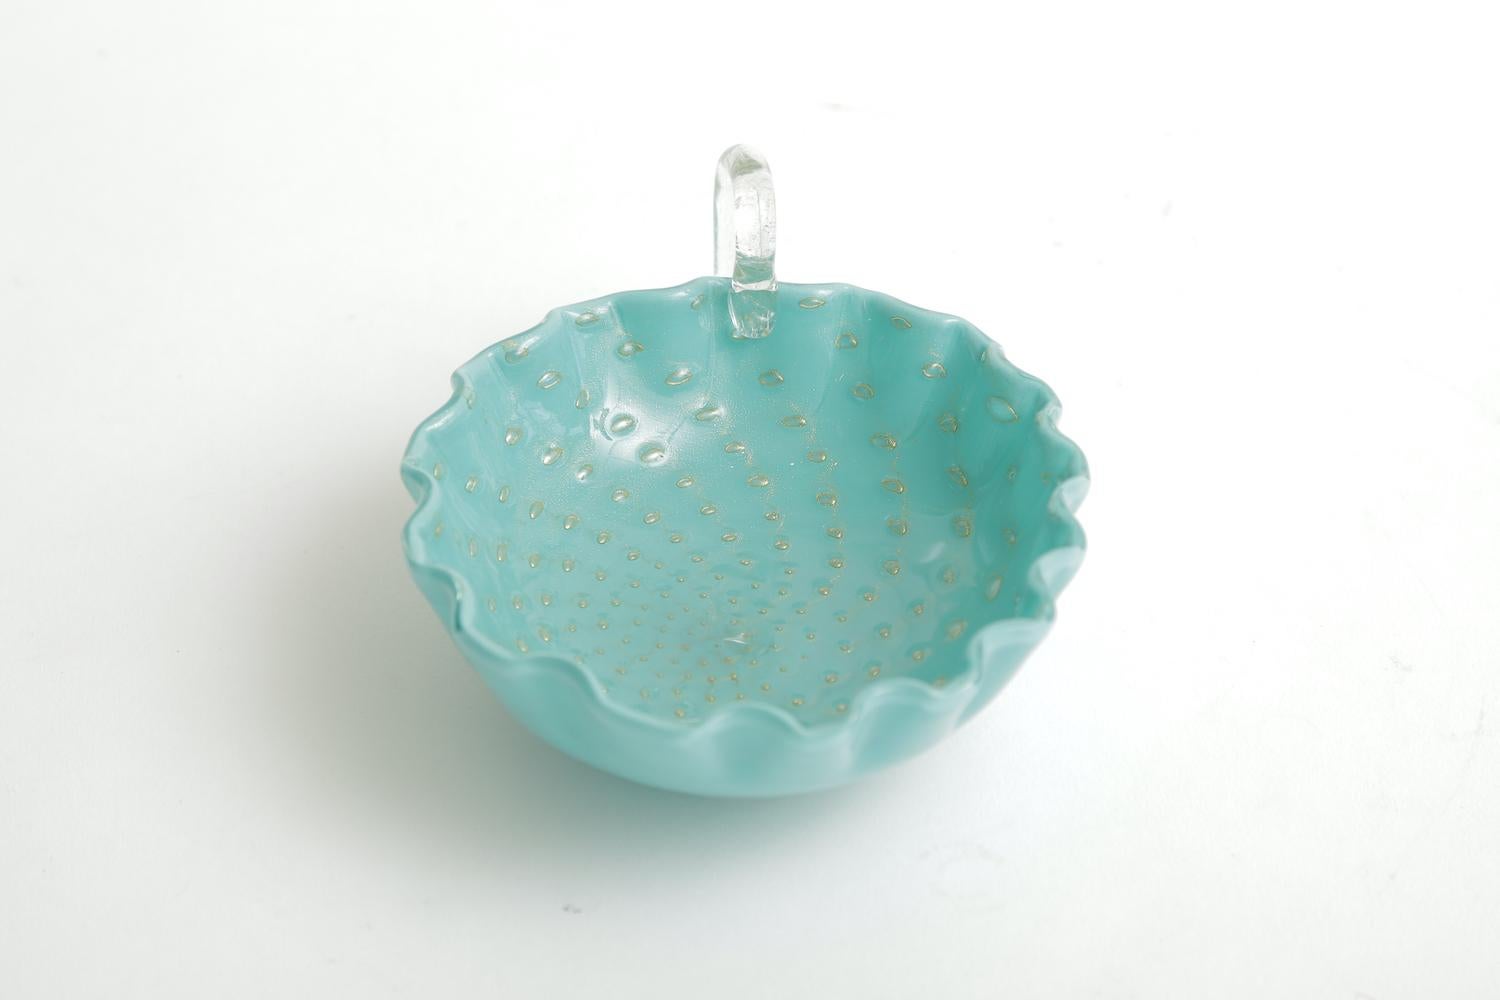 This gorgeous small Italian Murano glass bowl by Barovier e Toso has cinched ruffled edges with a clear glass handle. The color of turquoise offset by the gold aventurine floating in almond shaped droplets with texture is a beautiful combination.